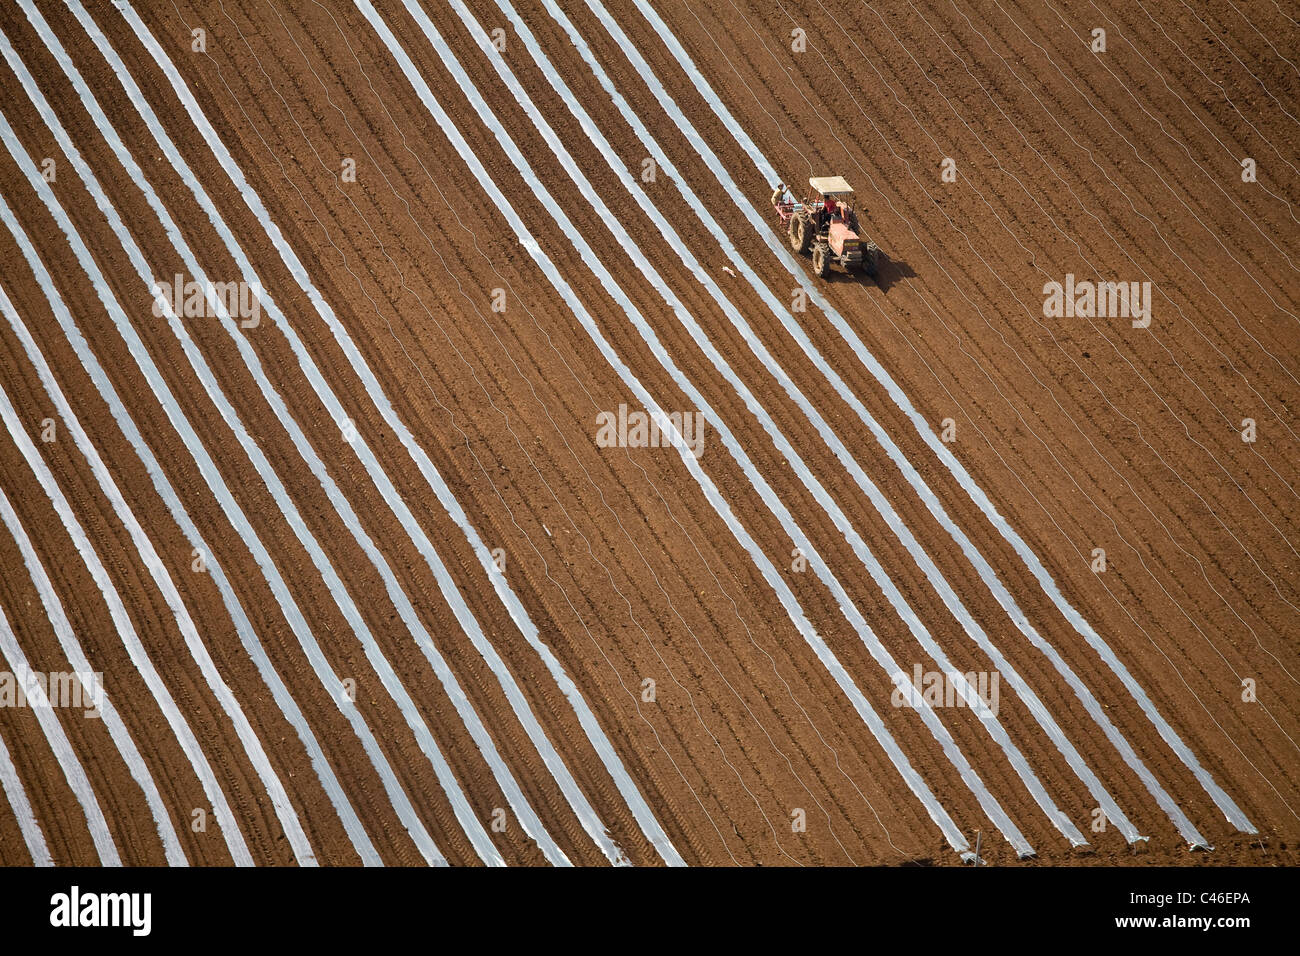 Aerial photograph of the agriculture fields of the Dan Metropolis Stock Photo